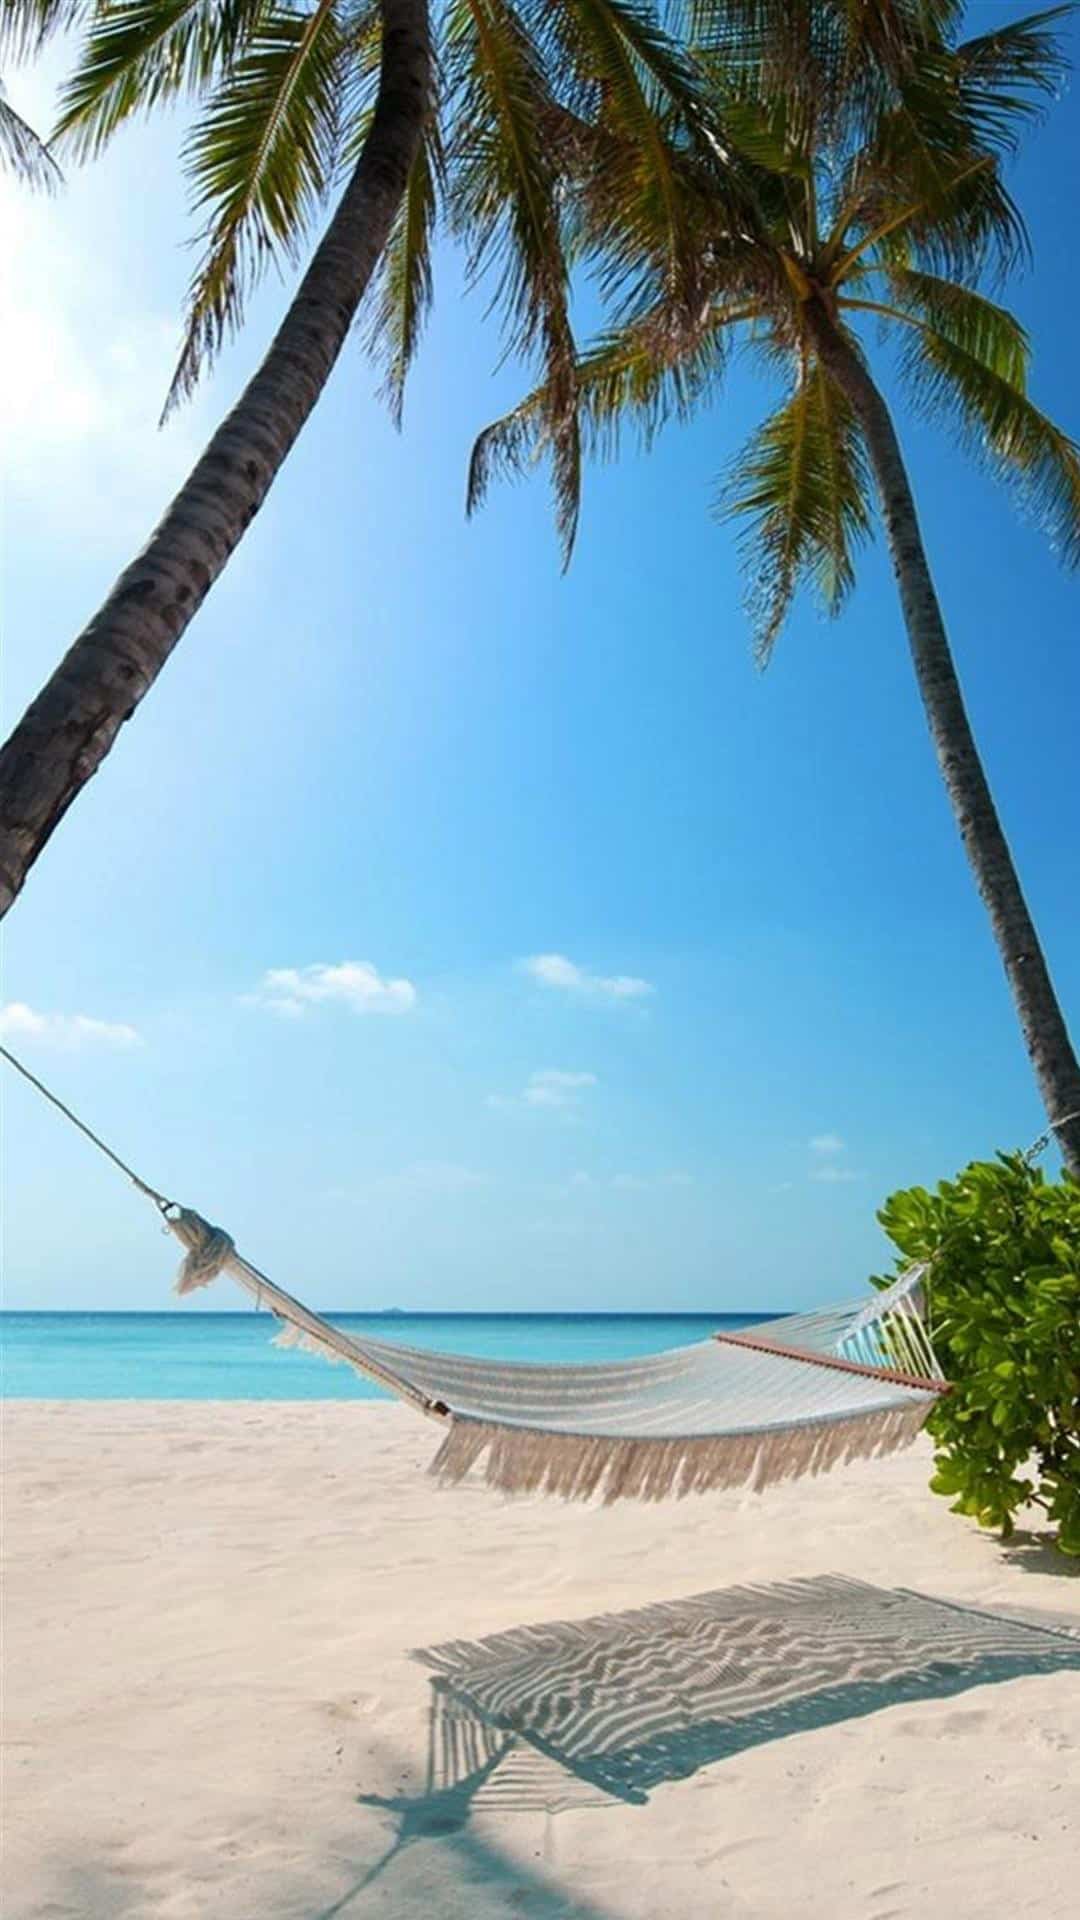 Exotic Beach Palm Trees Hammock Android Wallpaper